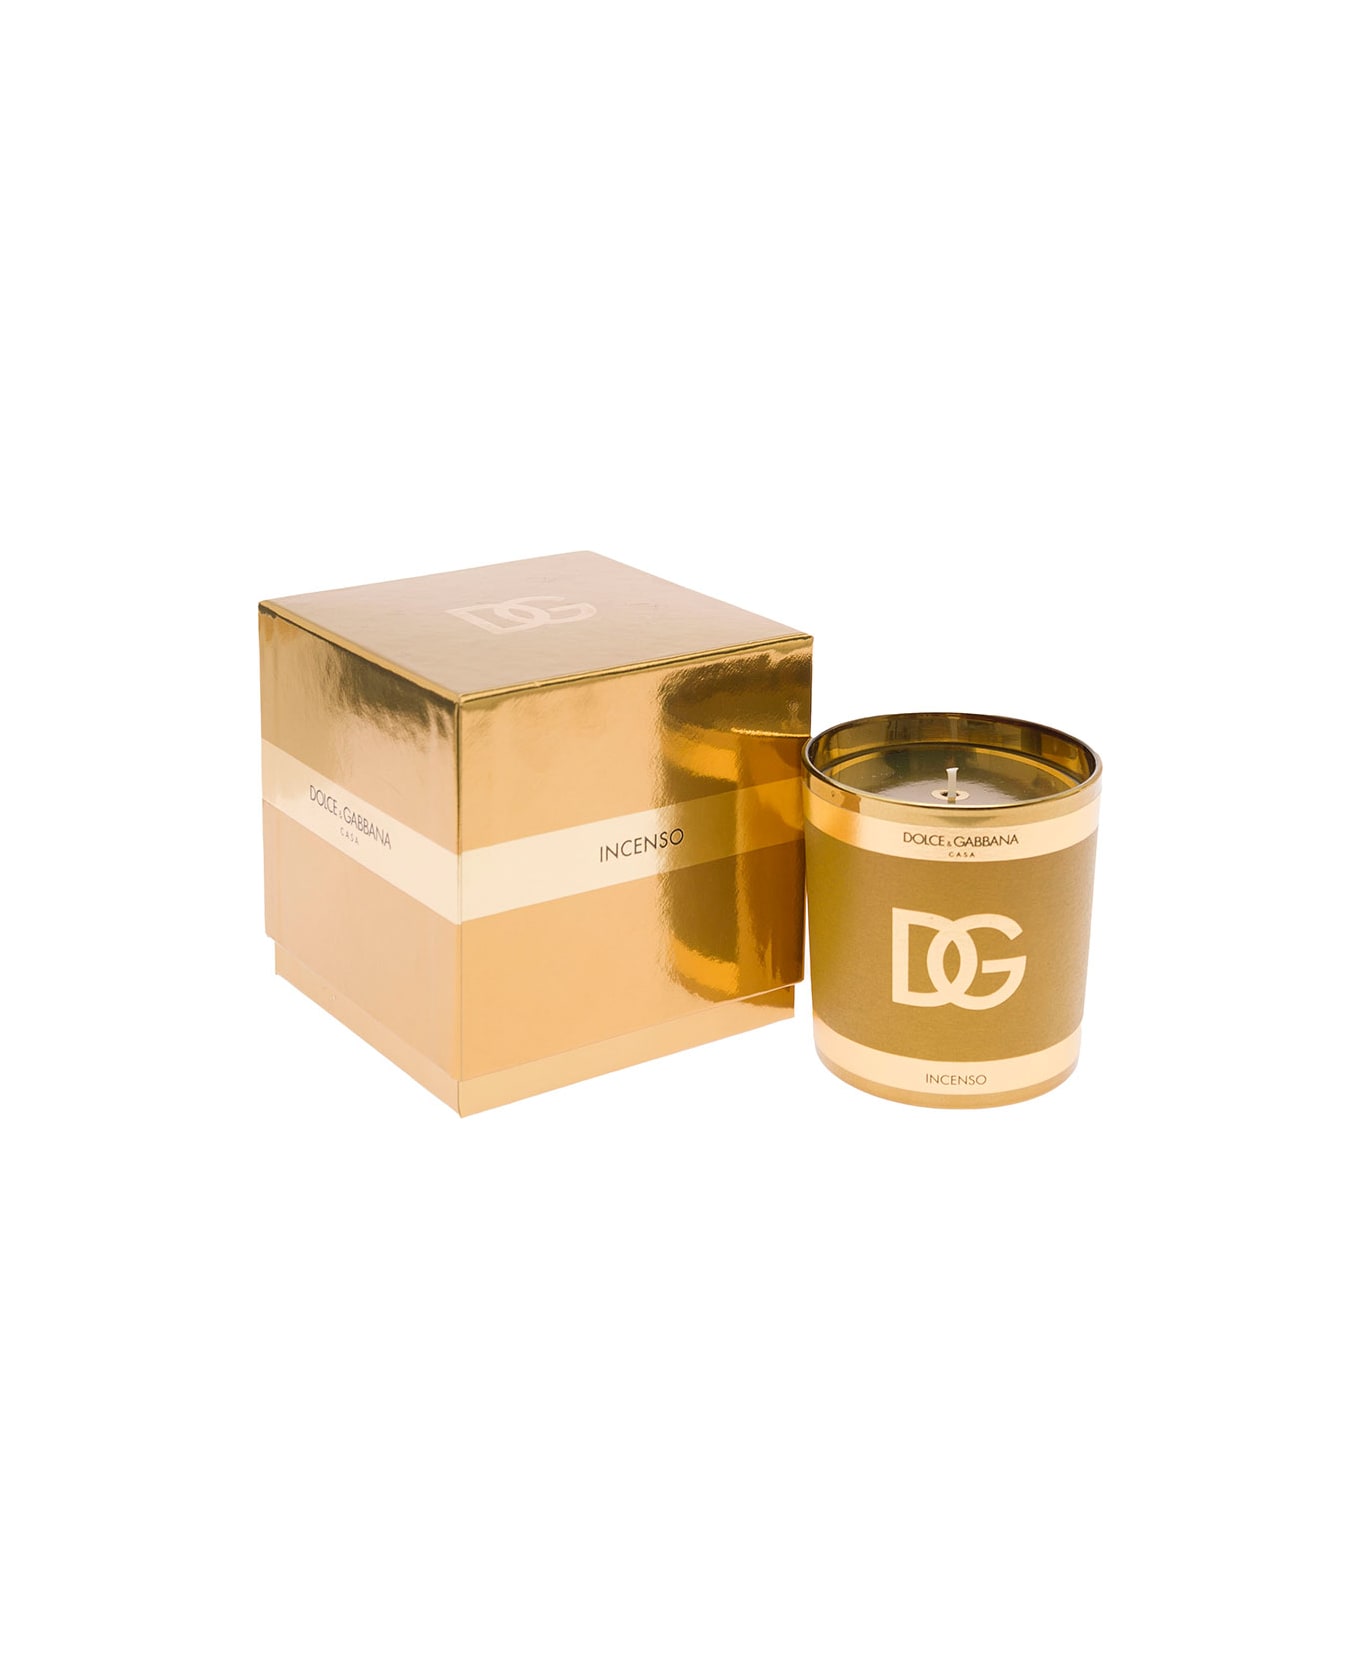 Dolce & Gabbana Incense Scented Candle - Metallic